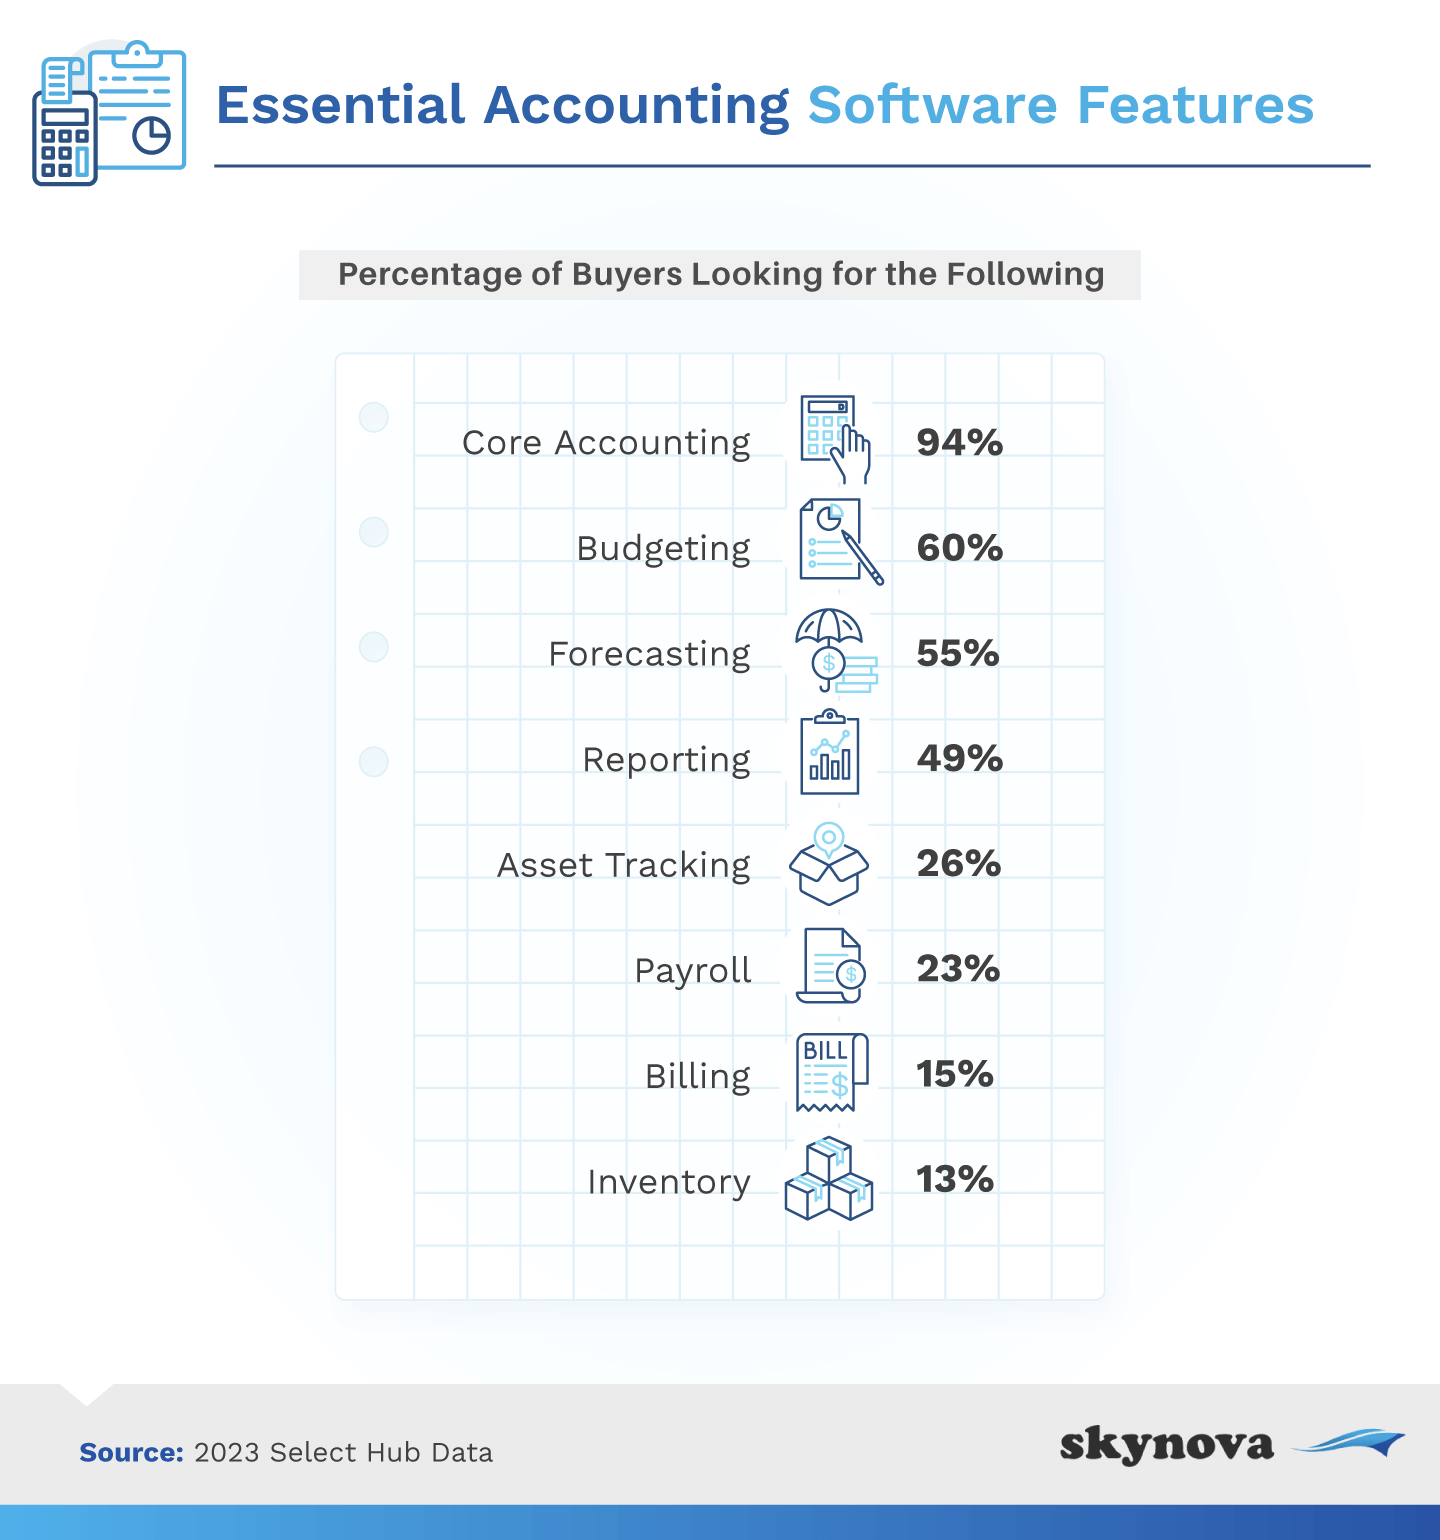 Essential features for accounting software